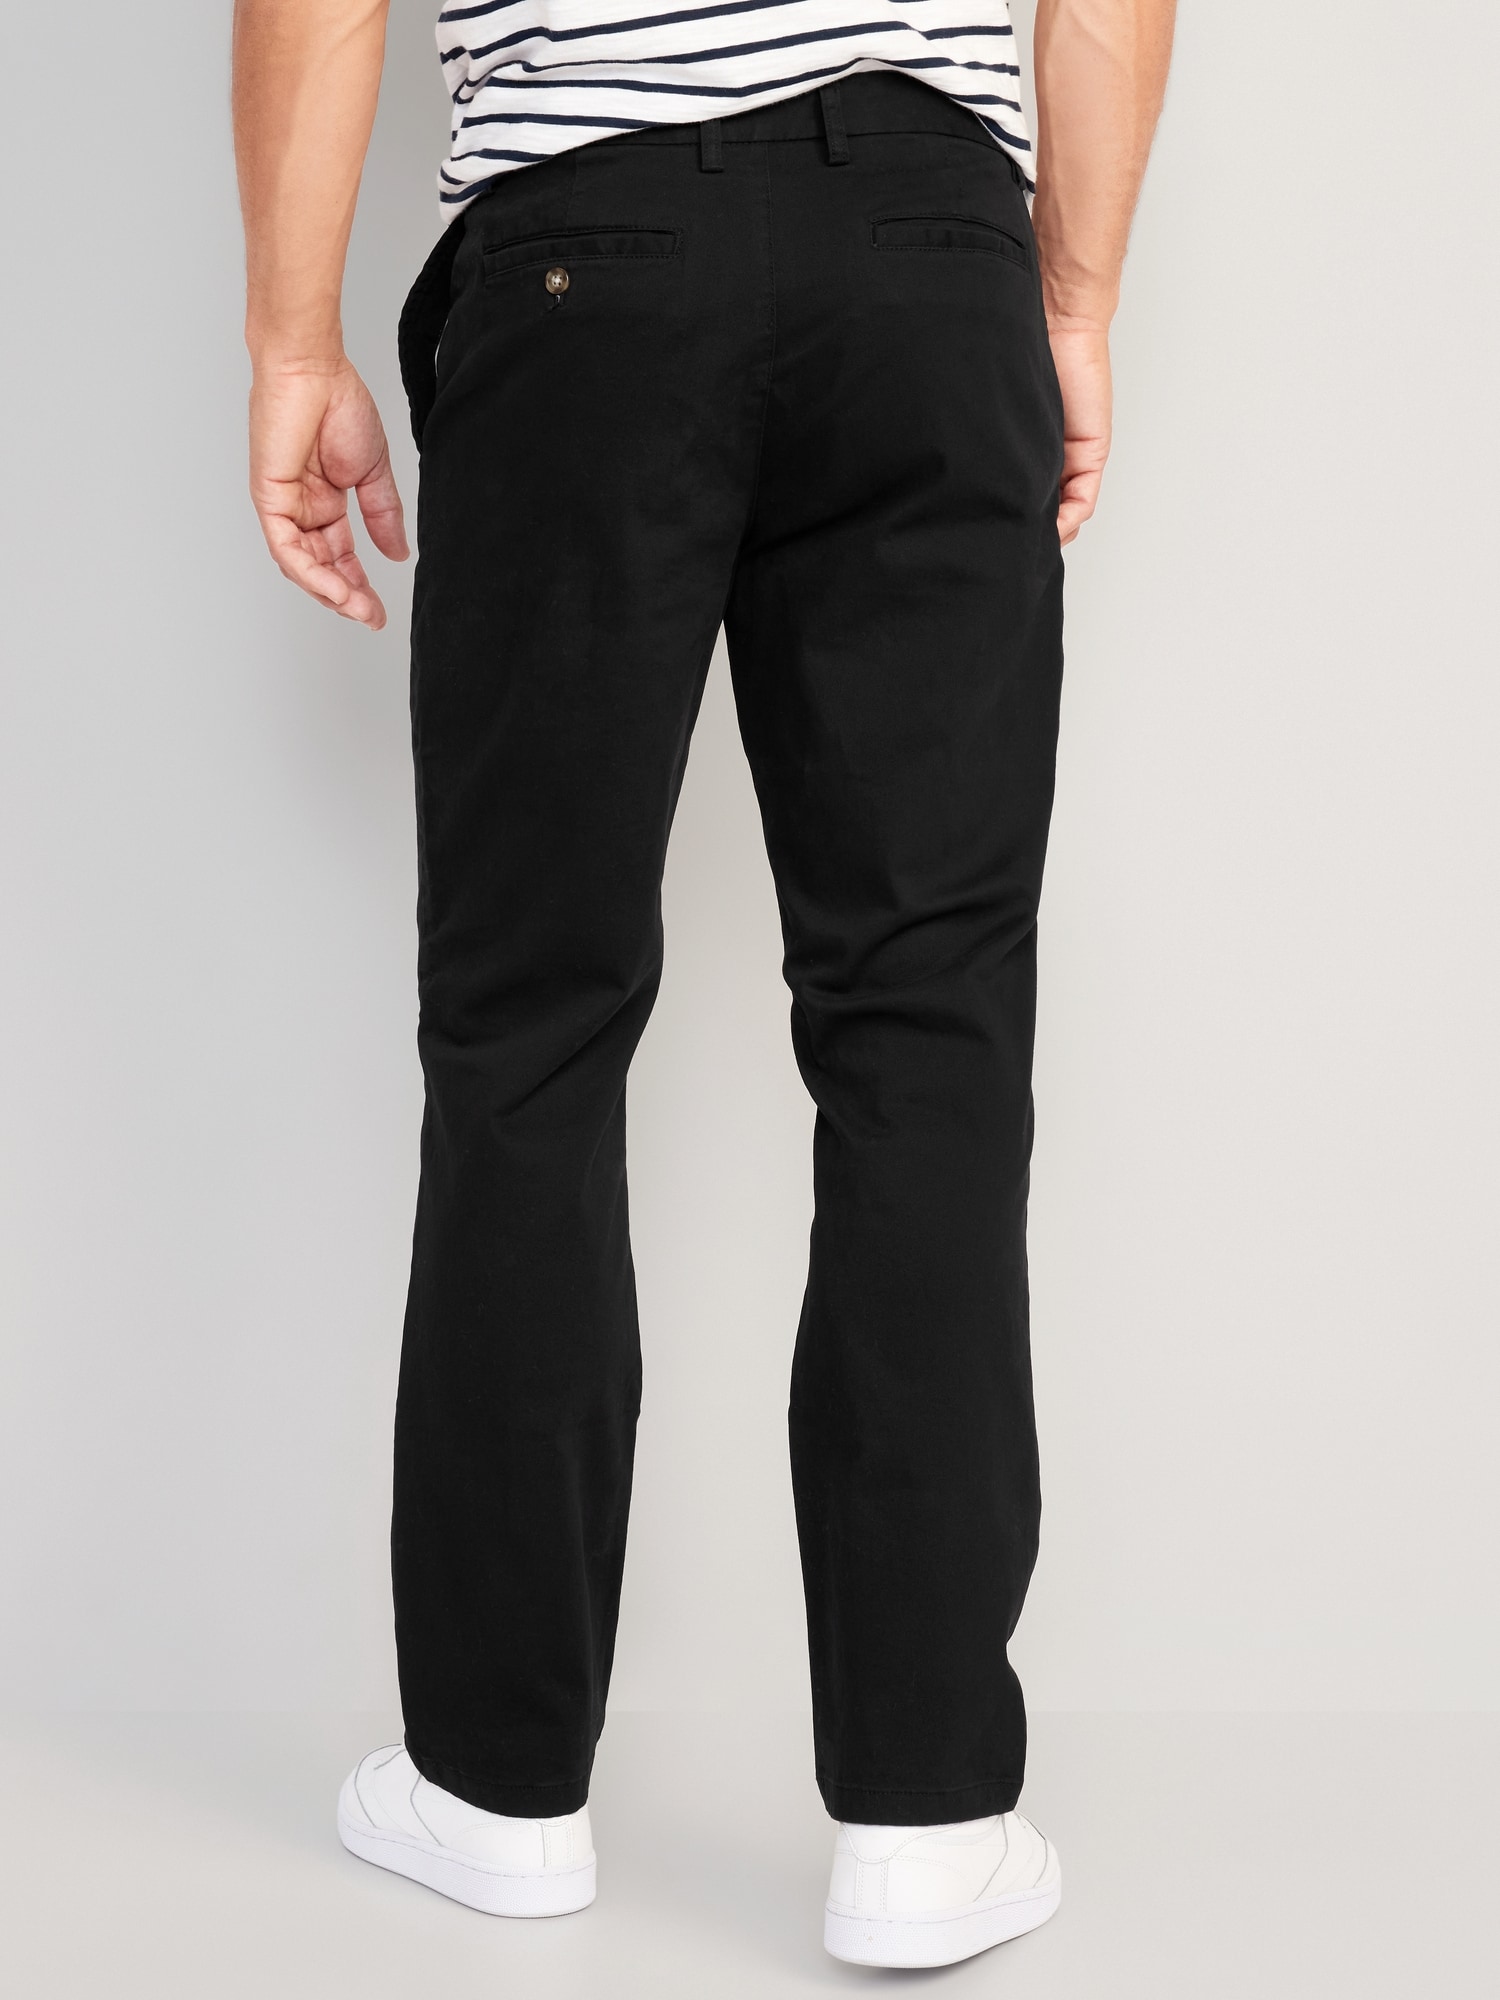 Straight Built-In Flex Rotation Chino Pants for Men | Old Navy